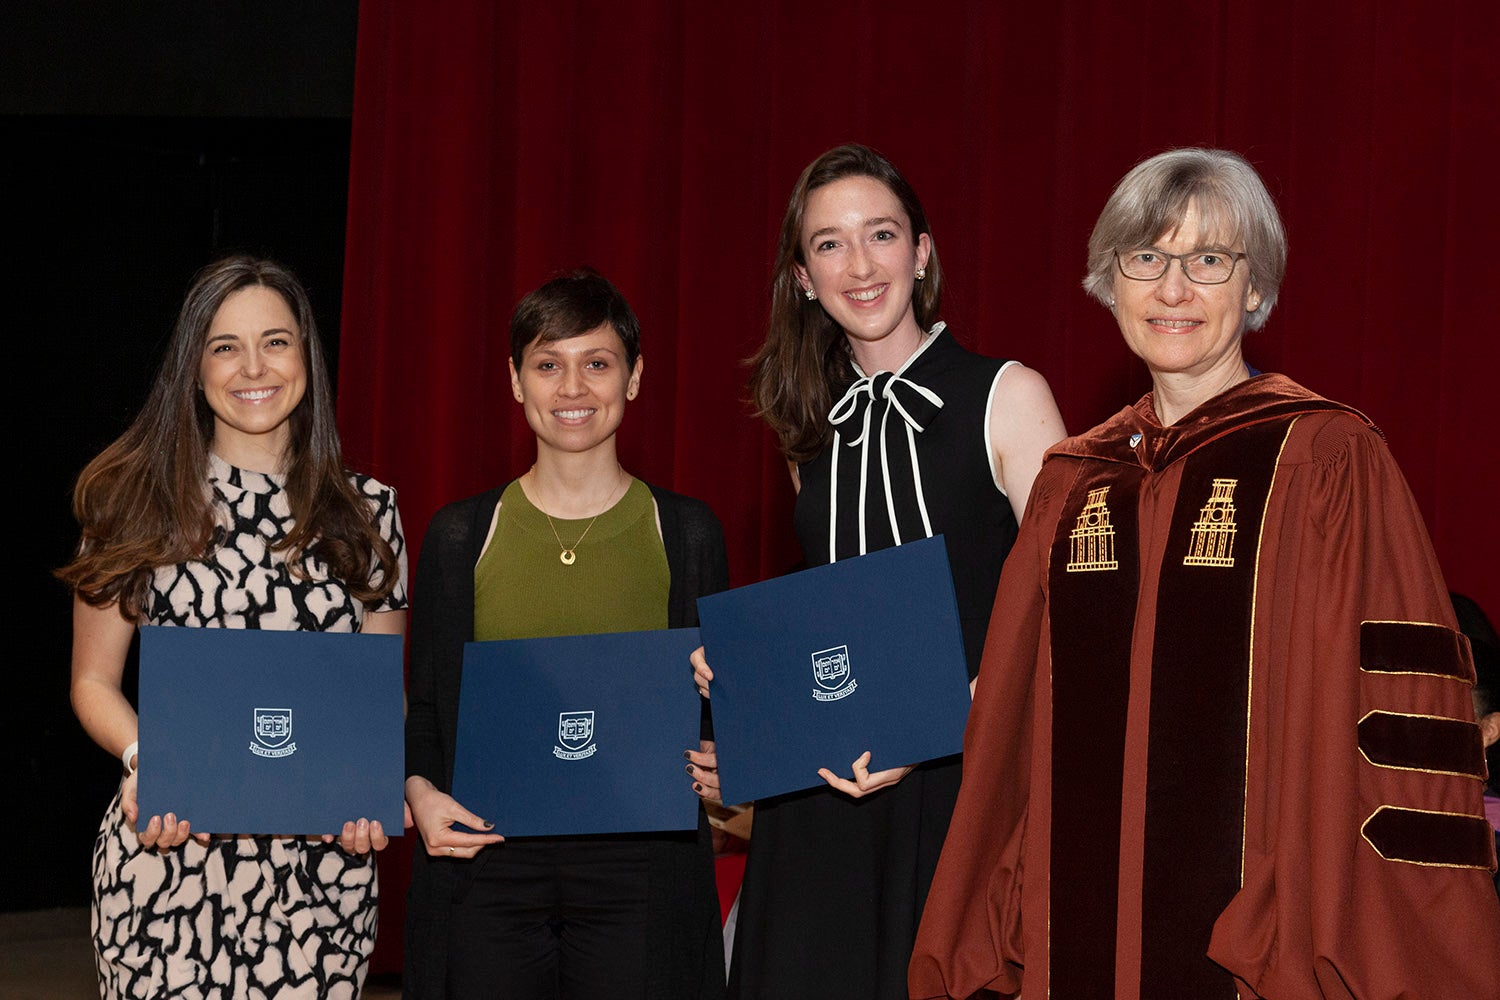 Scenes from the 2019 GSAS Convocation and Commencement | YaleNews